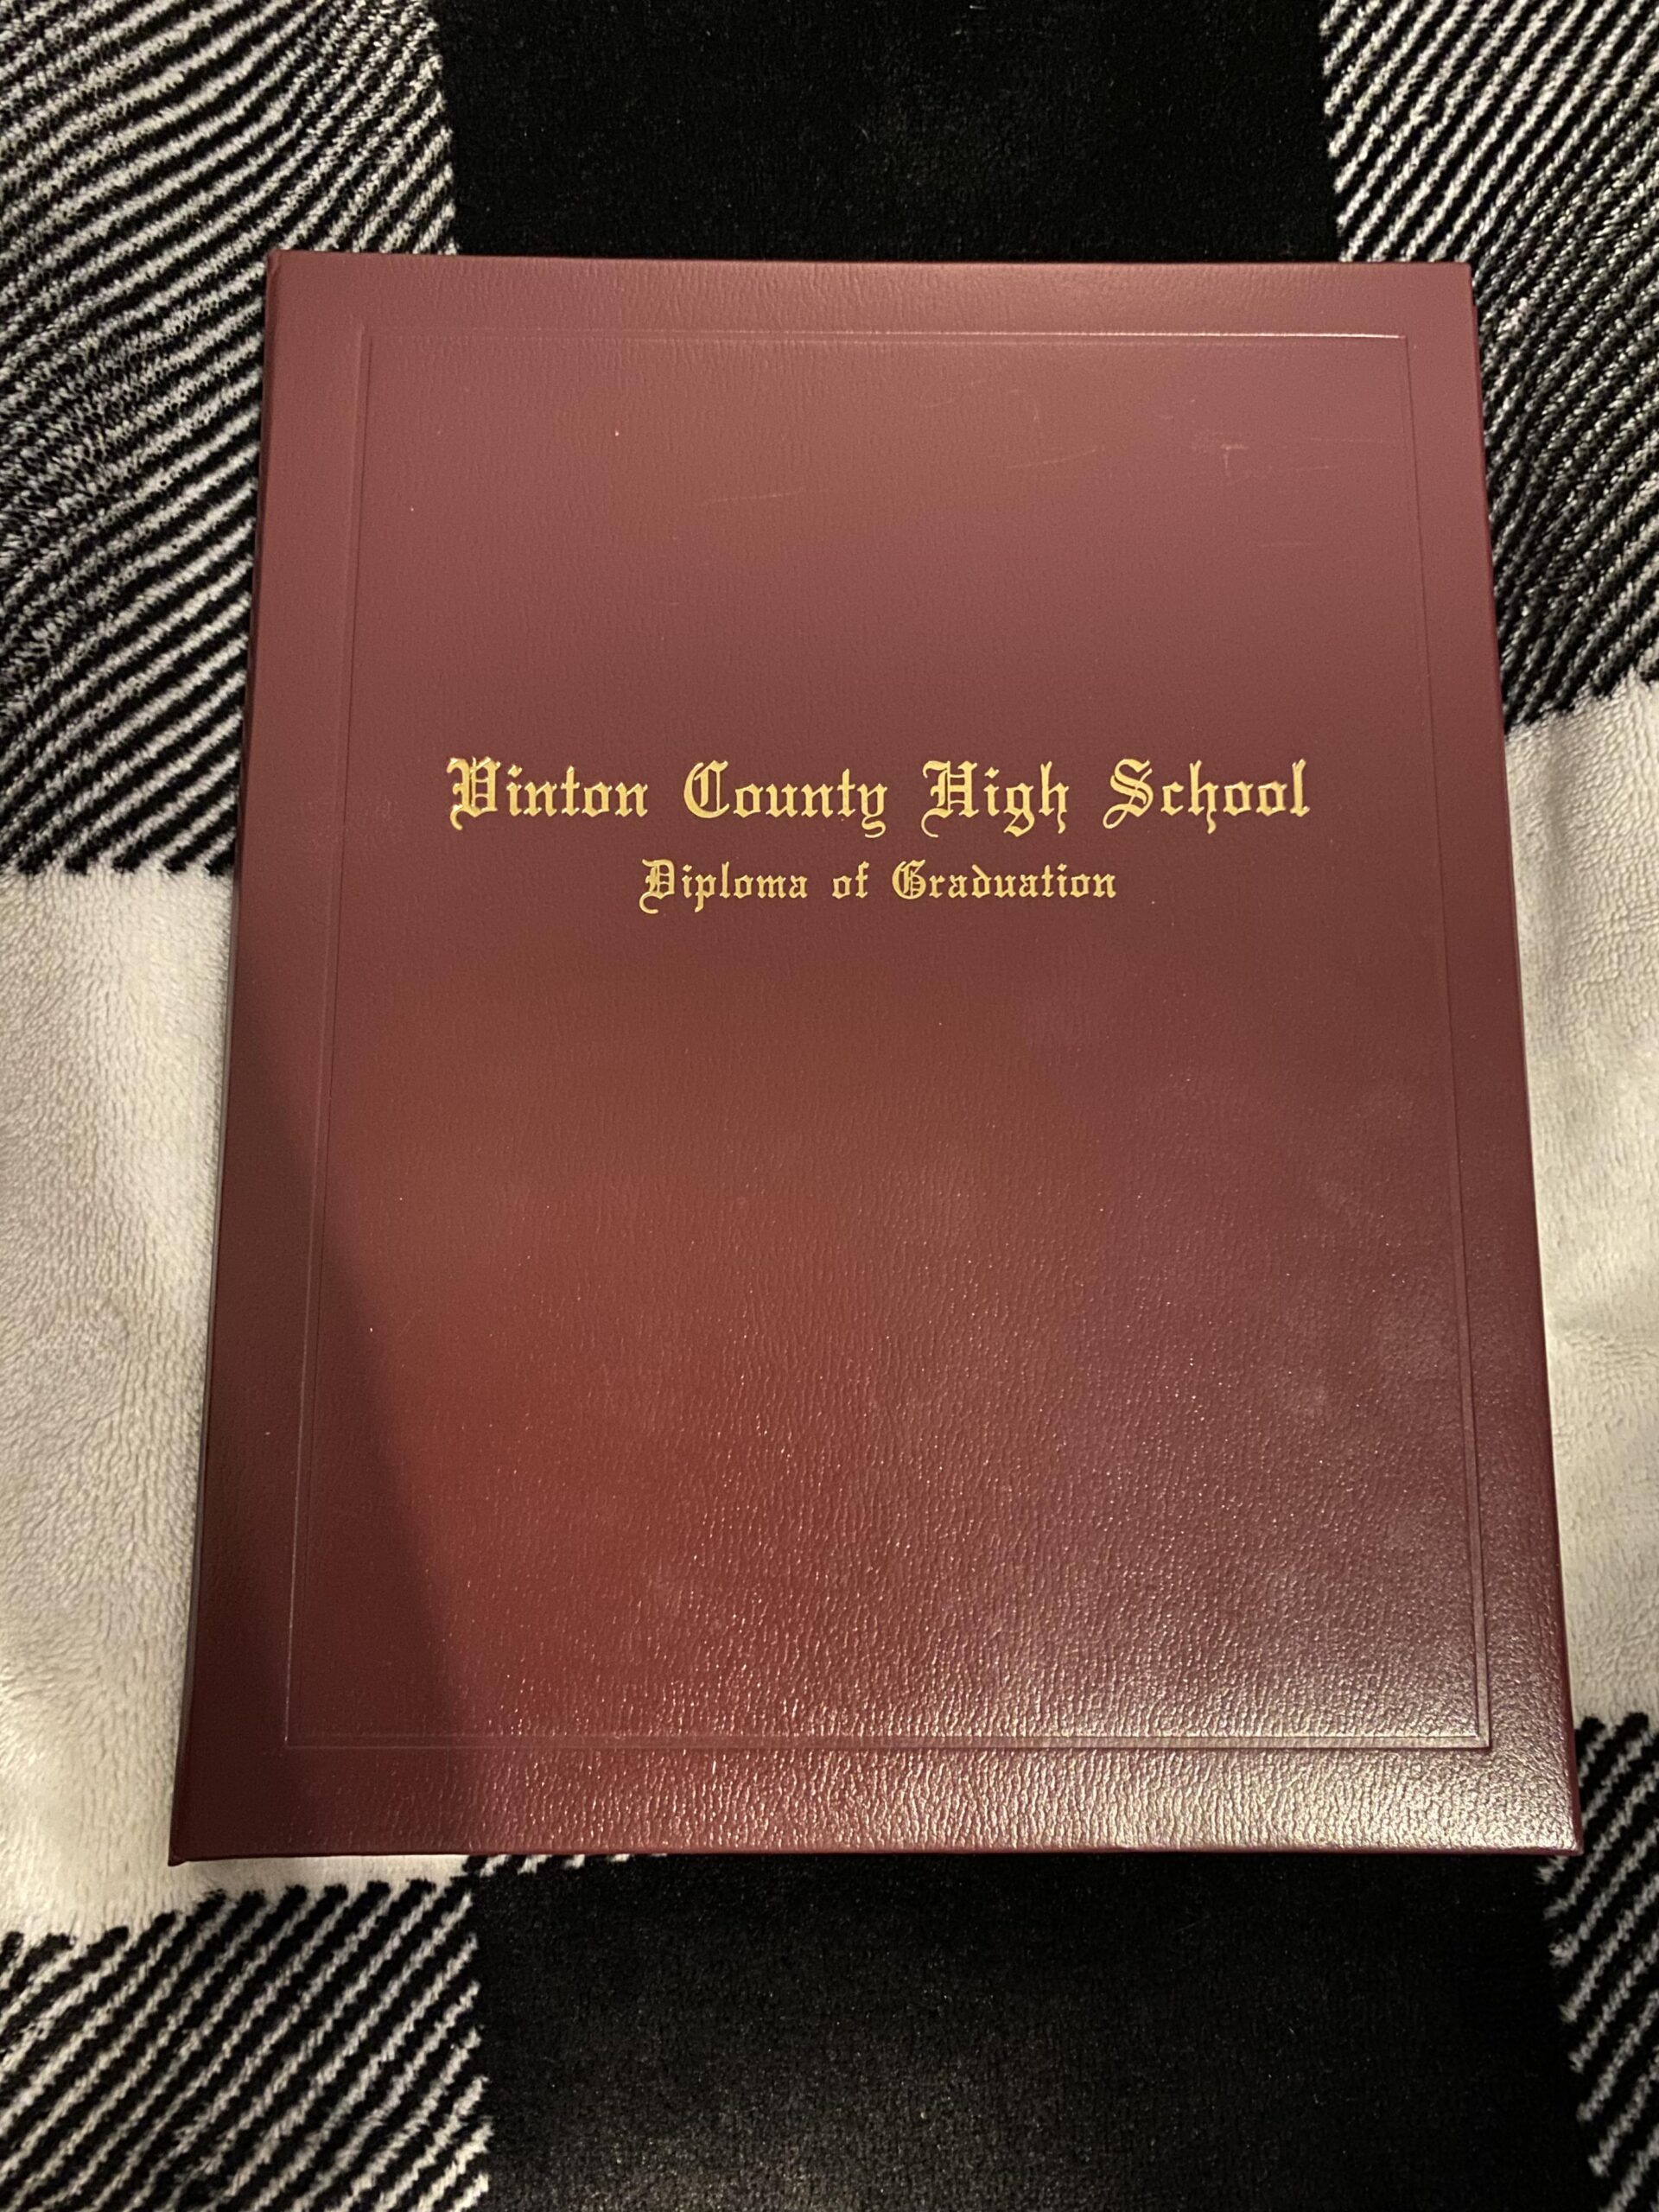 Maroon-binded front cover of a high school diploma.